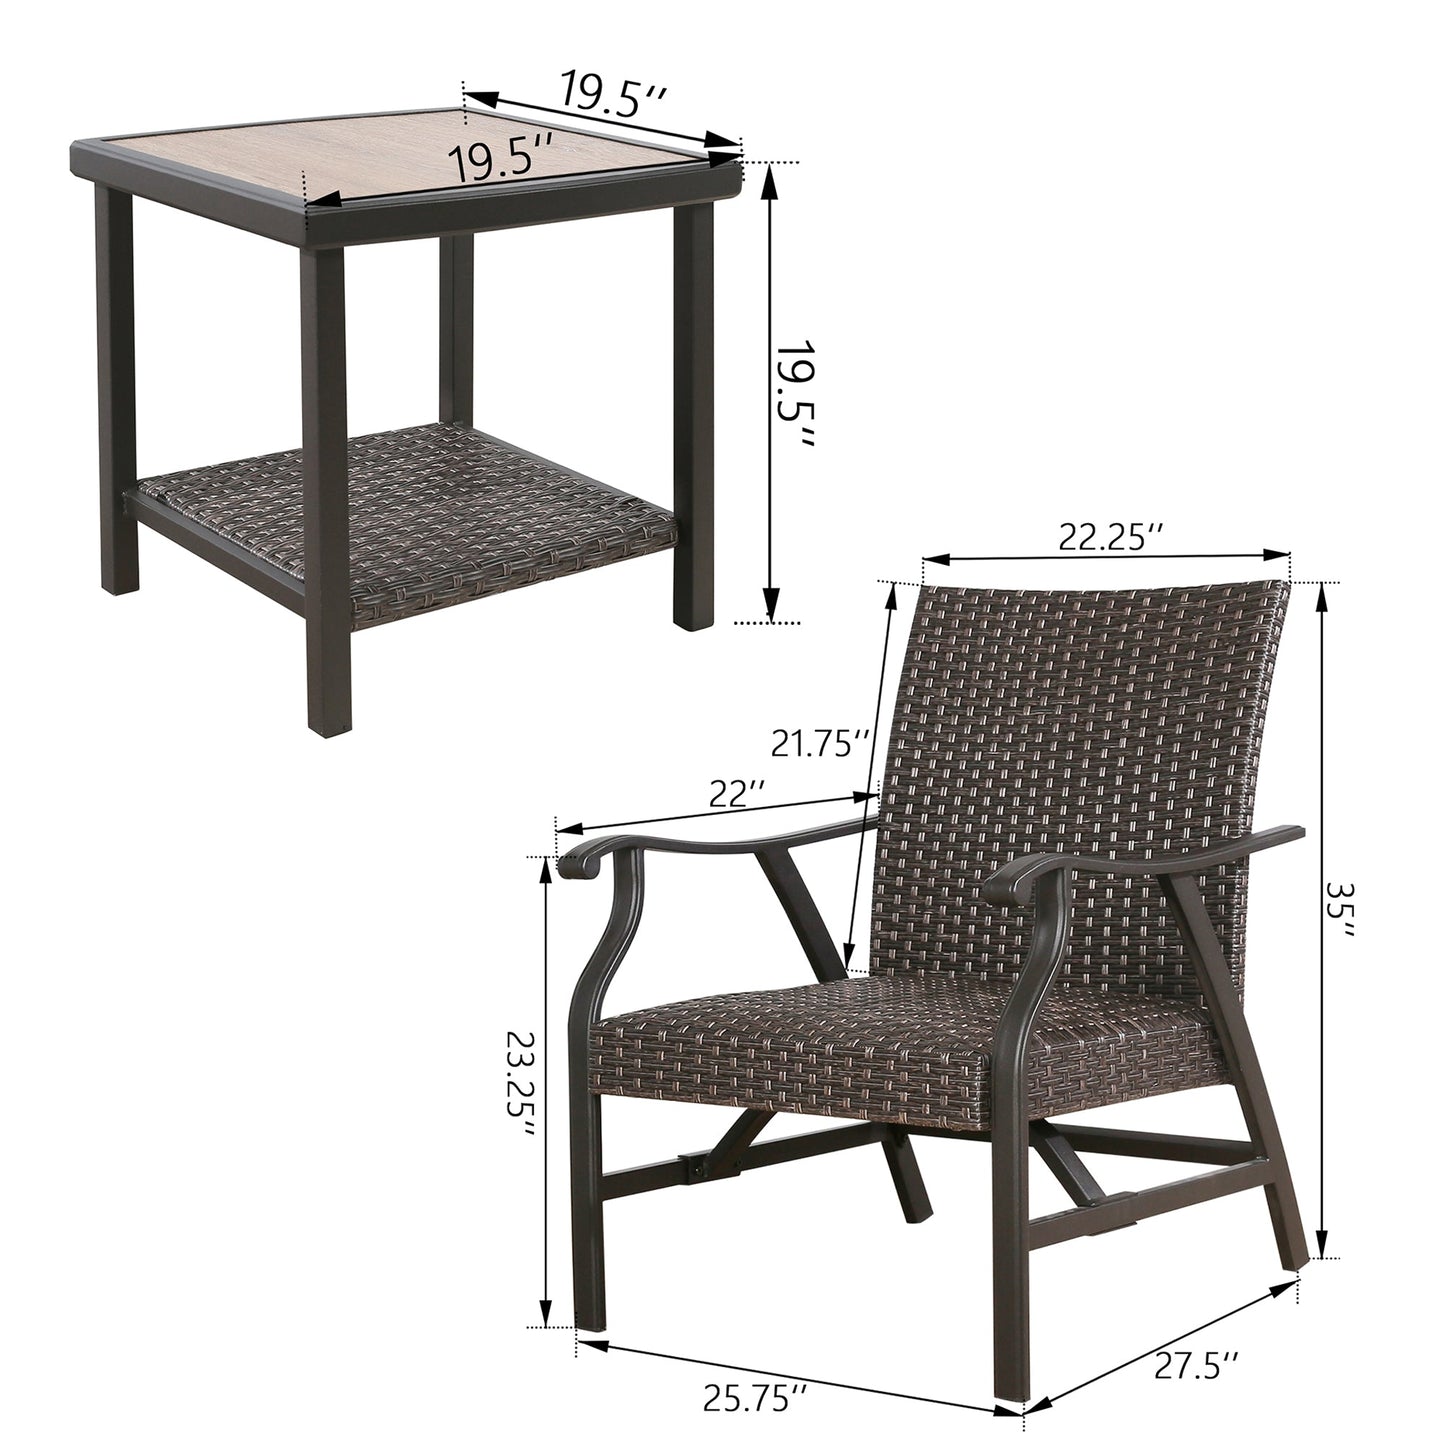 3 Piece Outdoor Wicker Set Patio Wicker Furniture Conversation Bistro Set with Side Table and Wicker Chairs